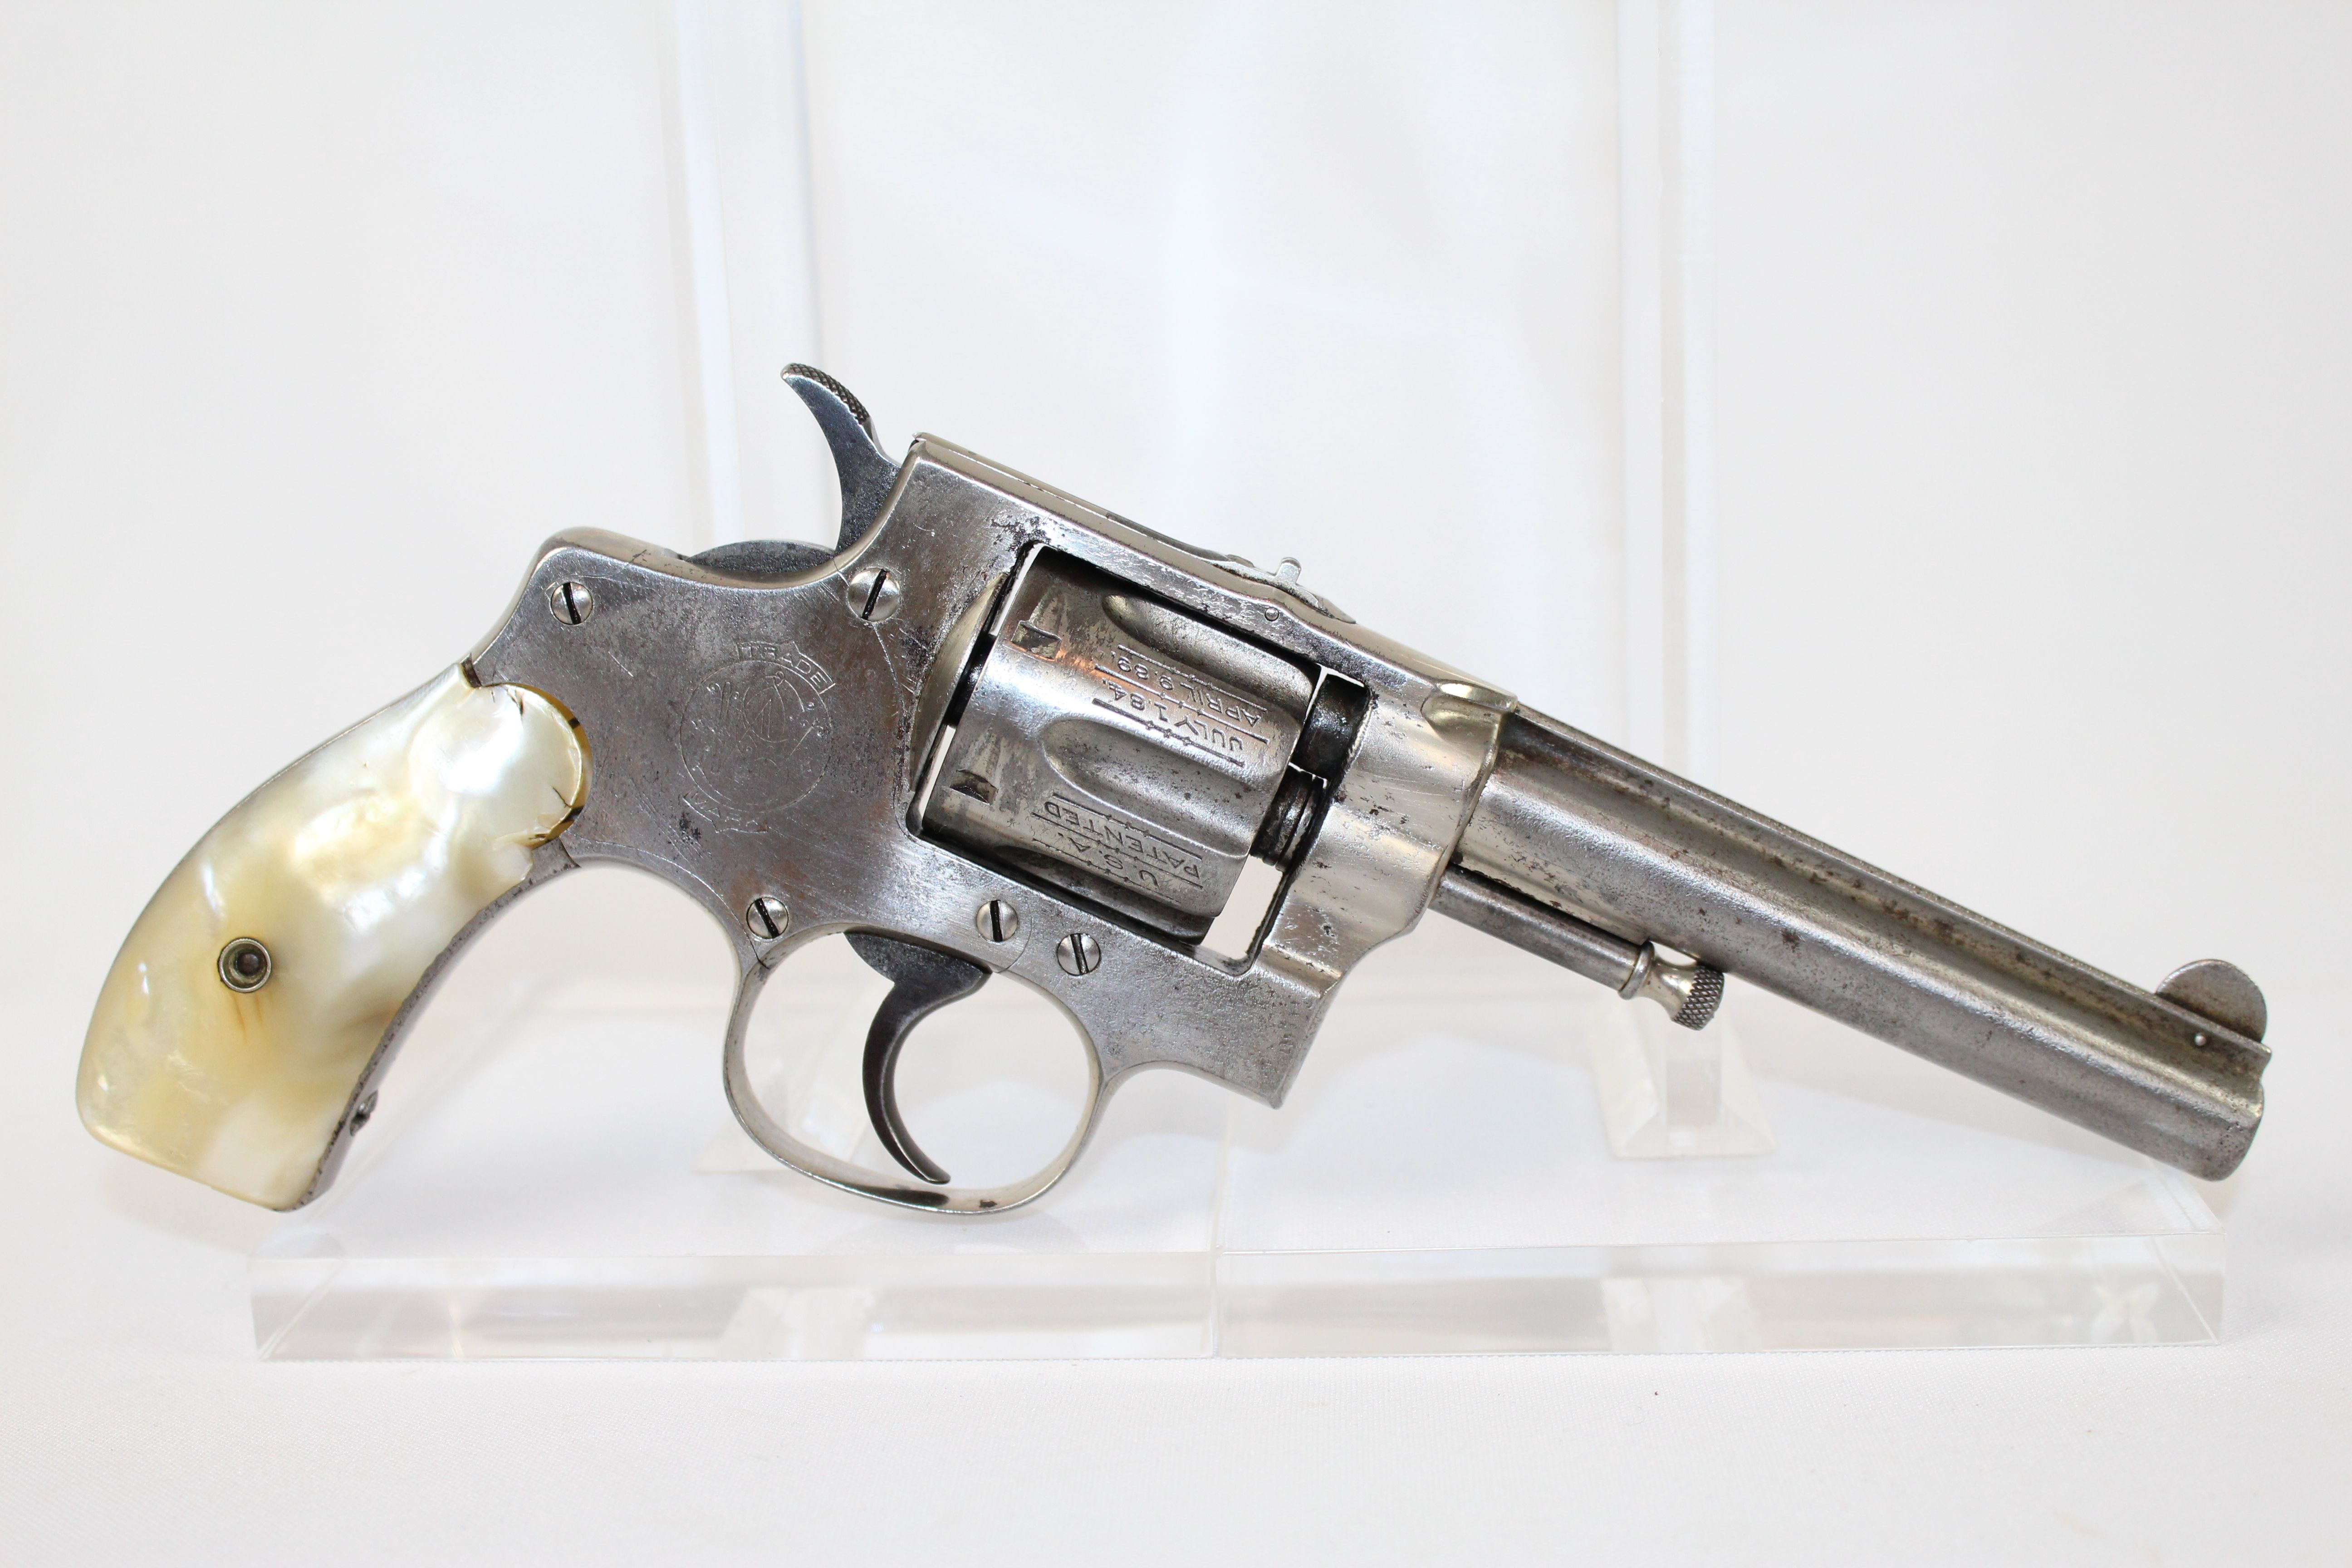 Smith and wesson 32 long revolver serial number lookup - kingdomgase